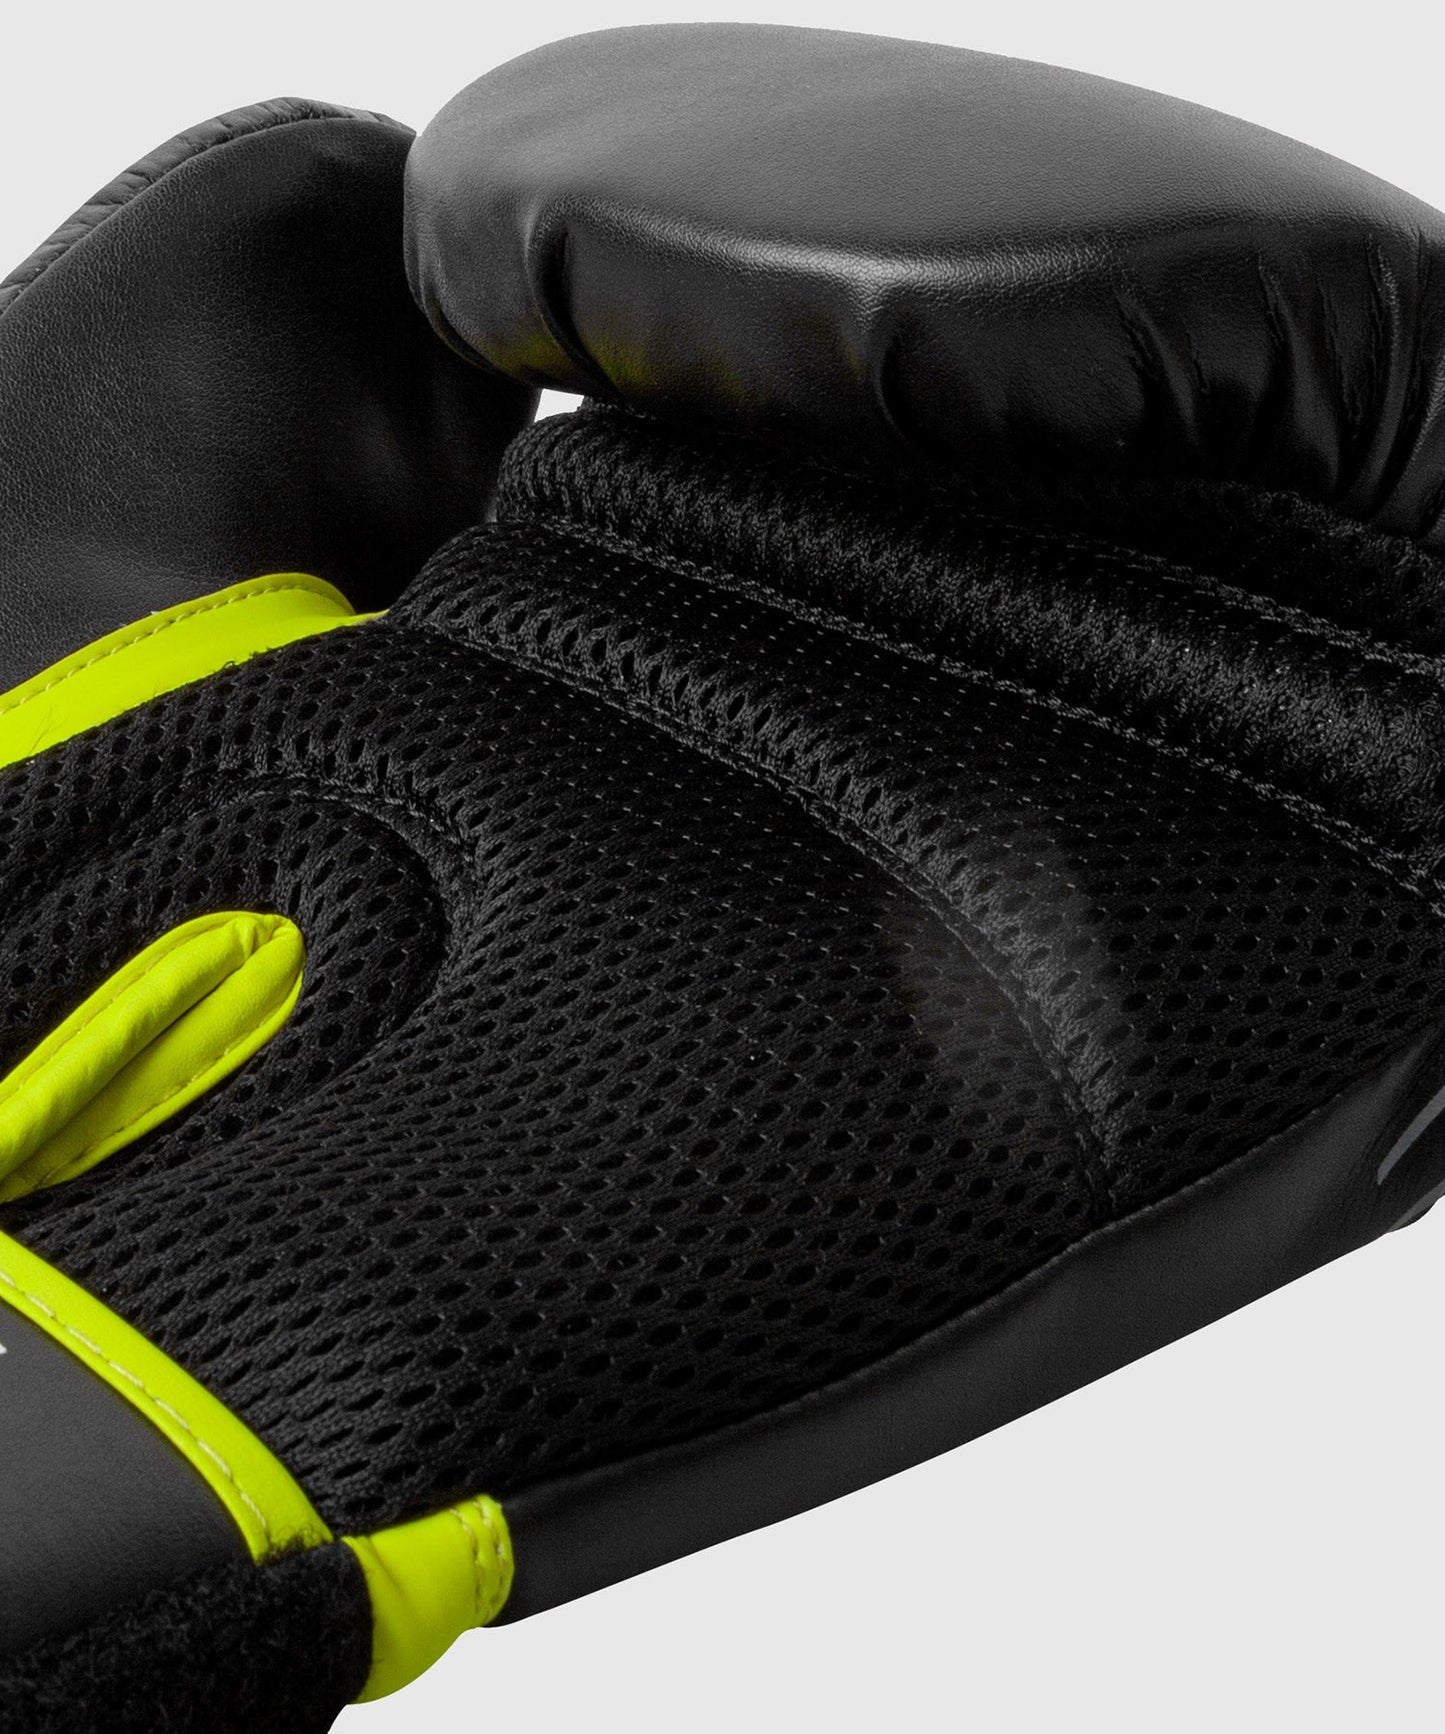 Ringhorns Charger MX Boxing Gloves - Black/Neo Yellow